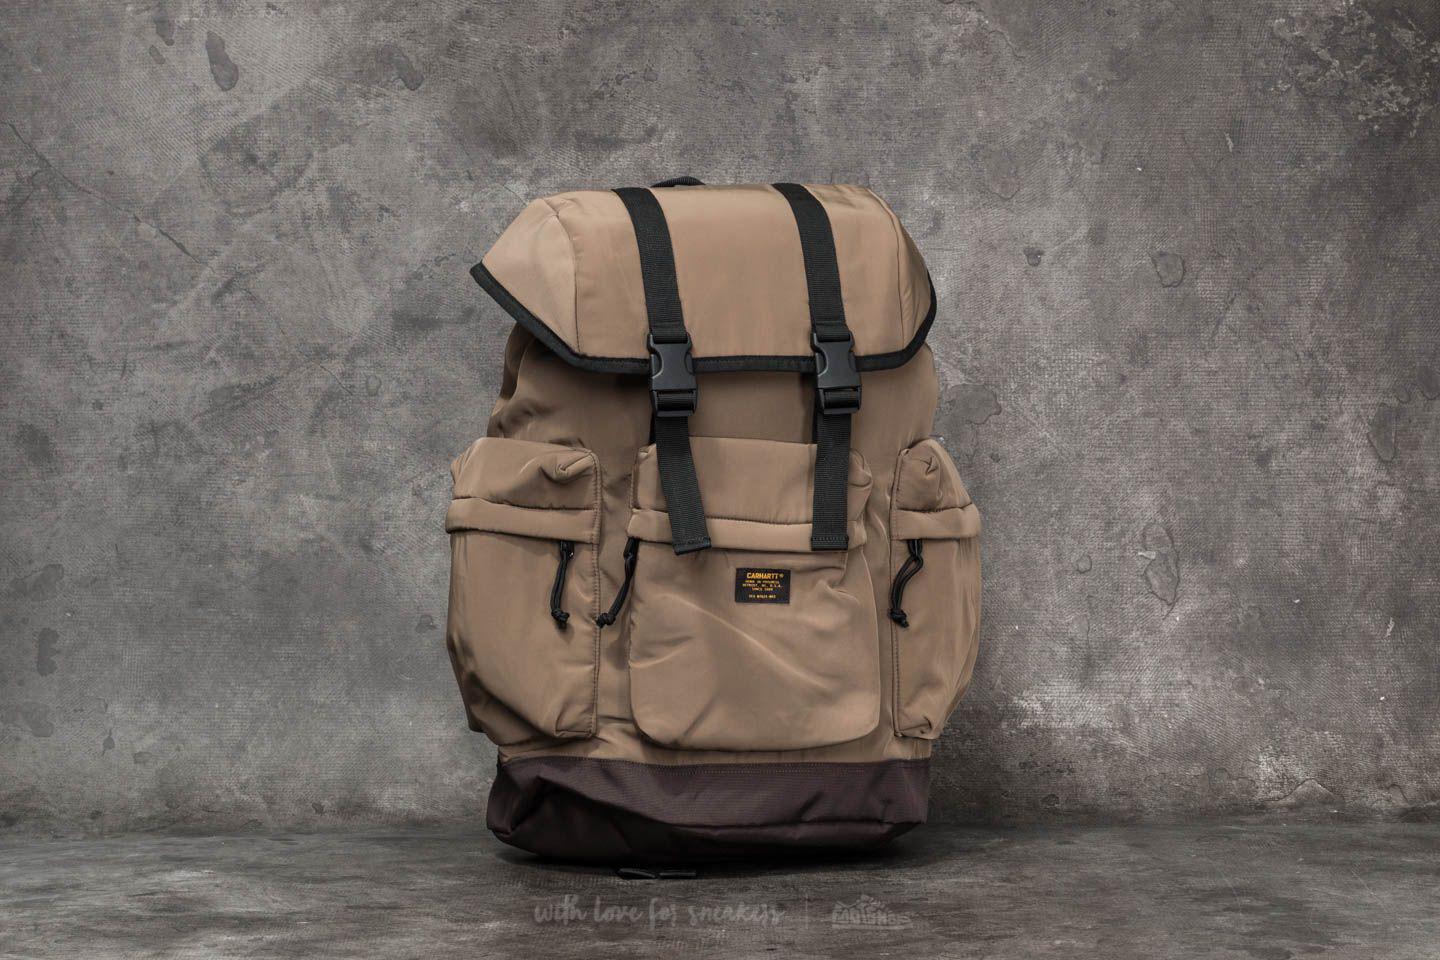 Carhartt Wip Military Backpack, Buy Now, Hotsell, 55% OFF,  www.busformentera.com